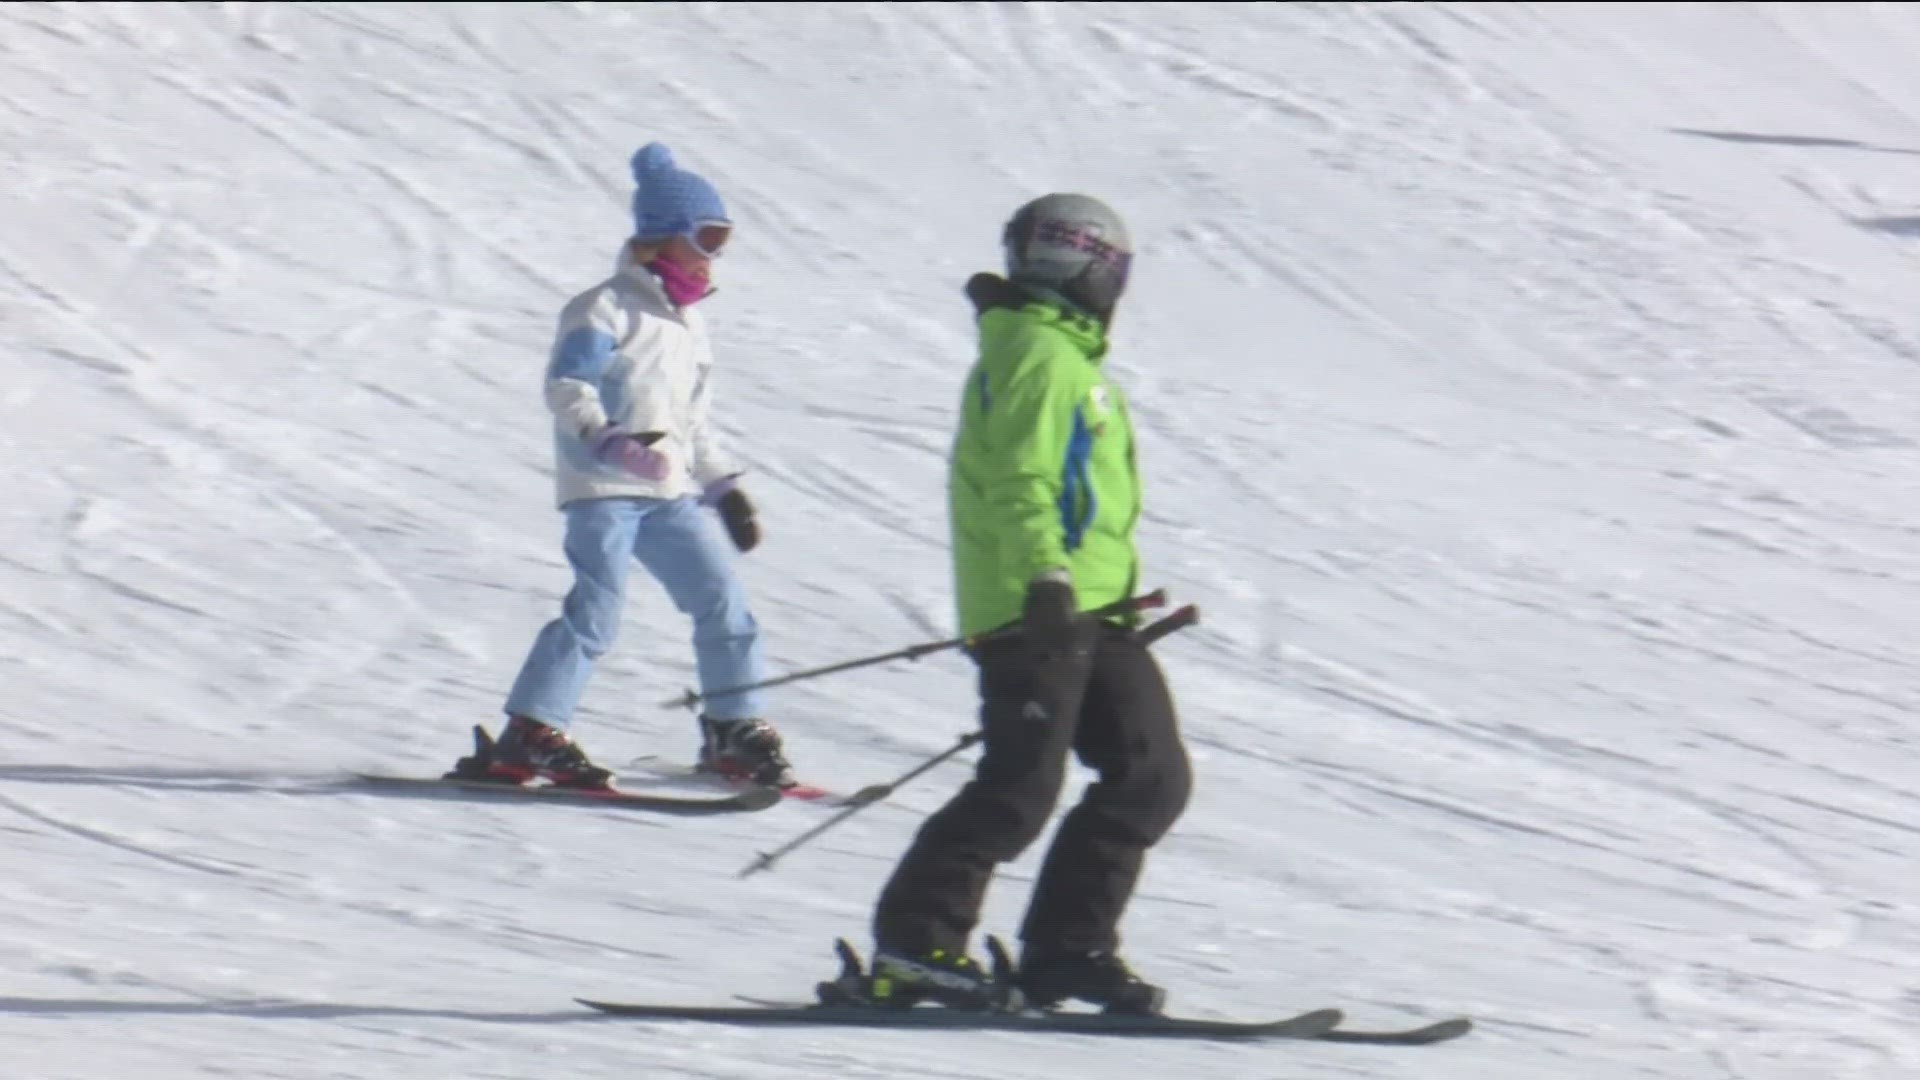 Spring weather is here, and several ski resorts announced closing dates.